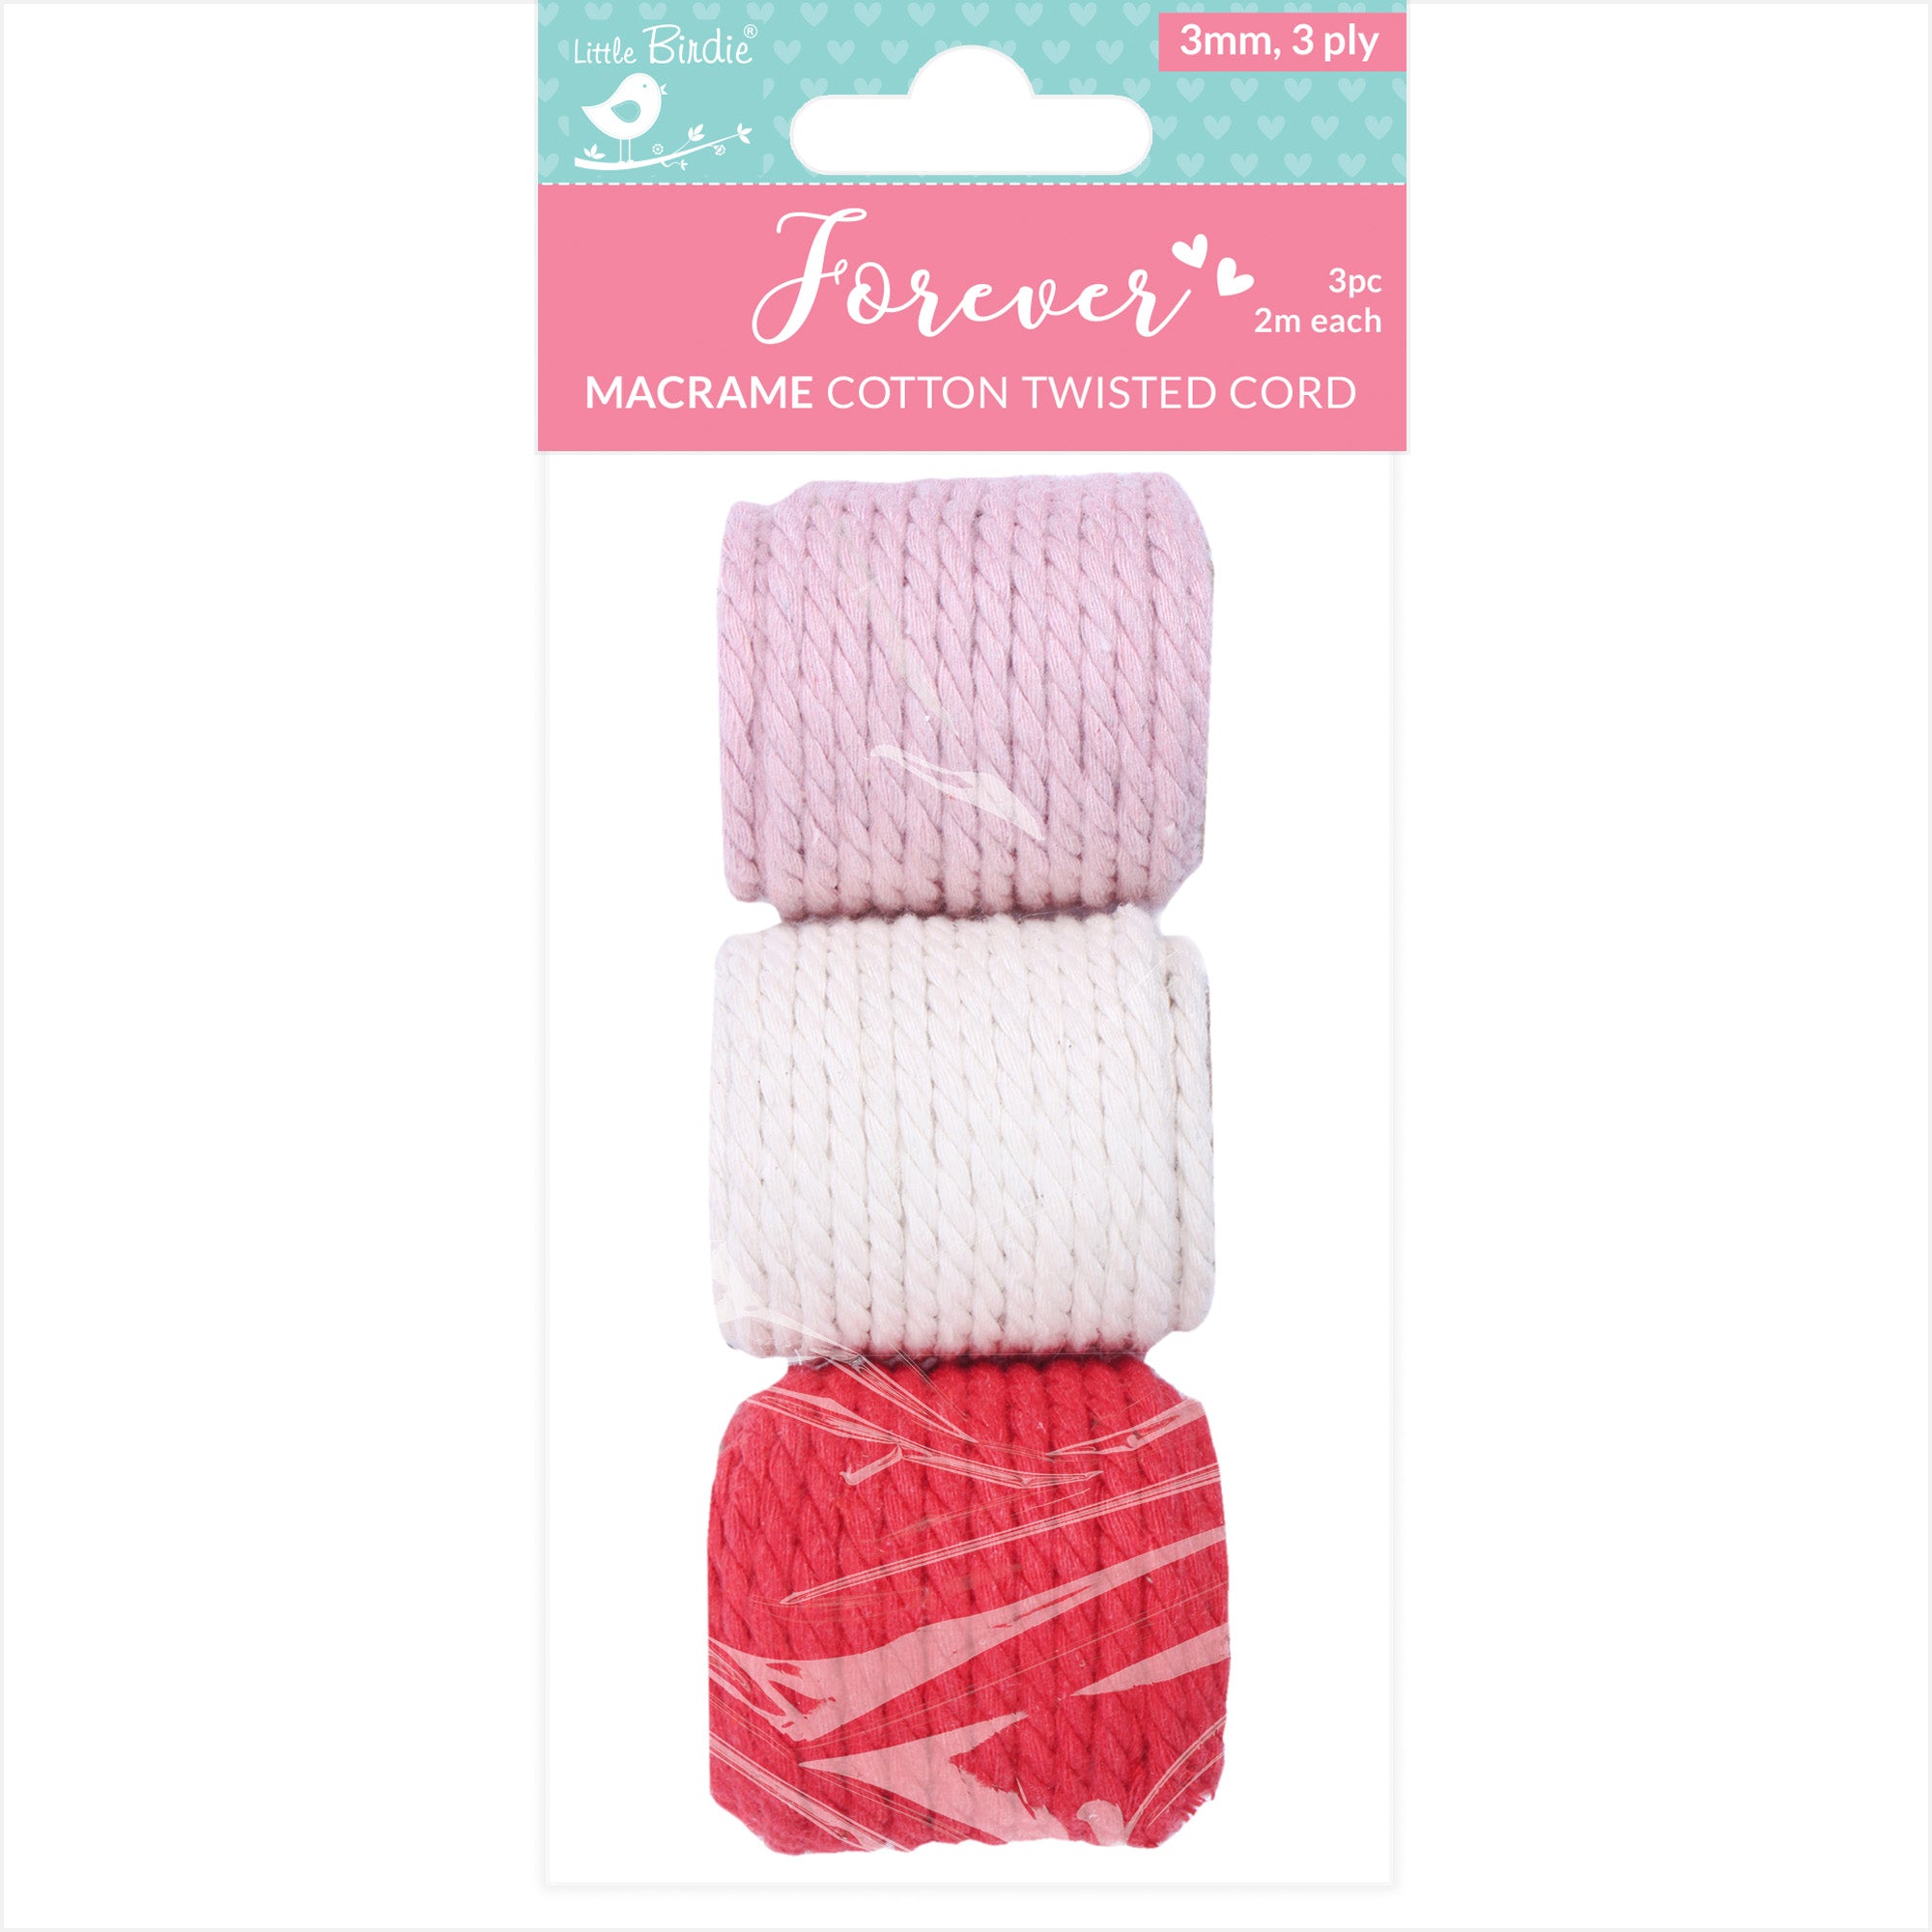 Cotton Twisted Cord 3Mm 3 Ply Rosy Charm 2Mtr 3Pc Lb